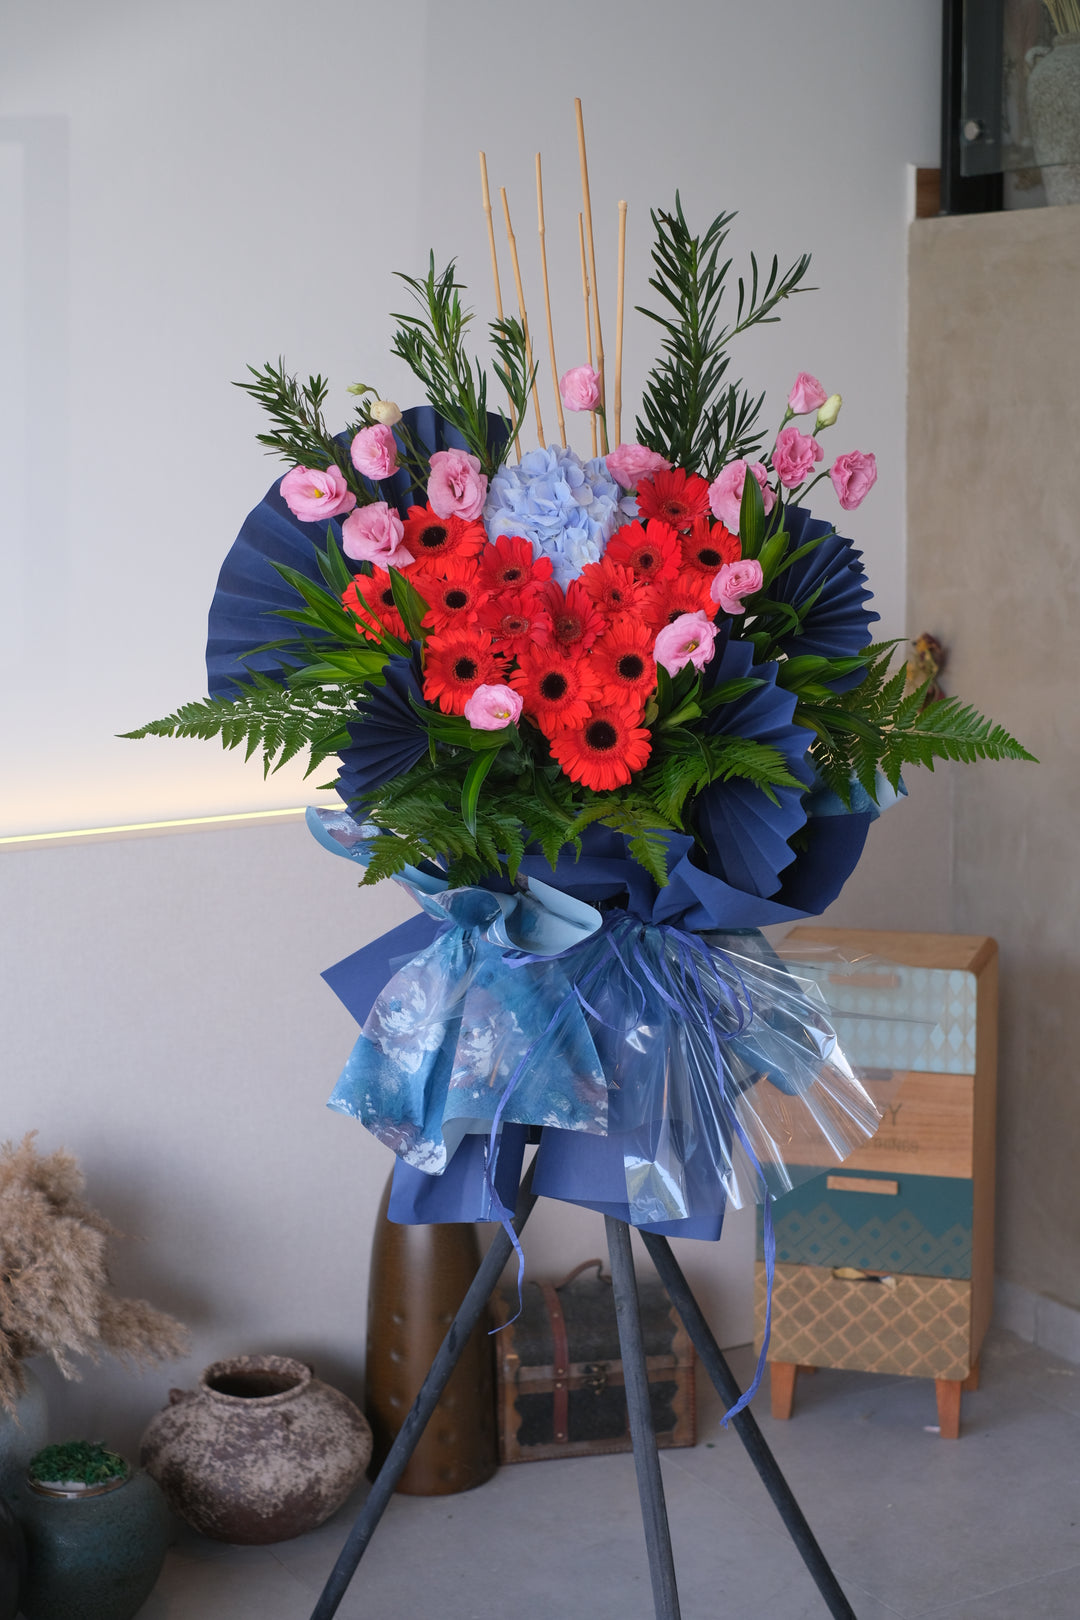 same day delivery flower, red chrysanthemum flower arrangements ideas, alternative to bloomthis penang